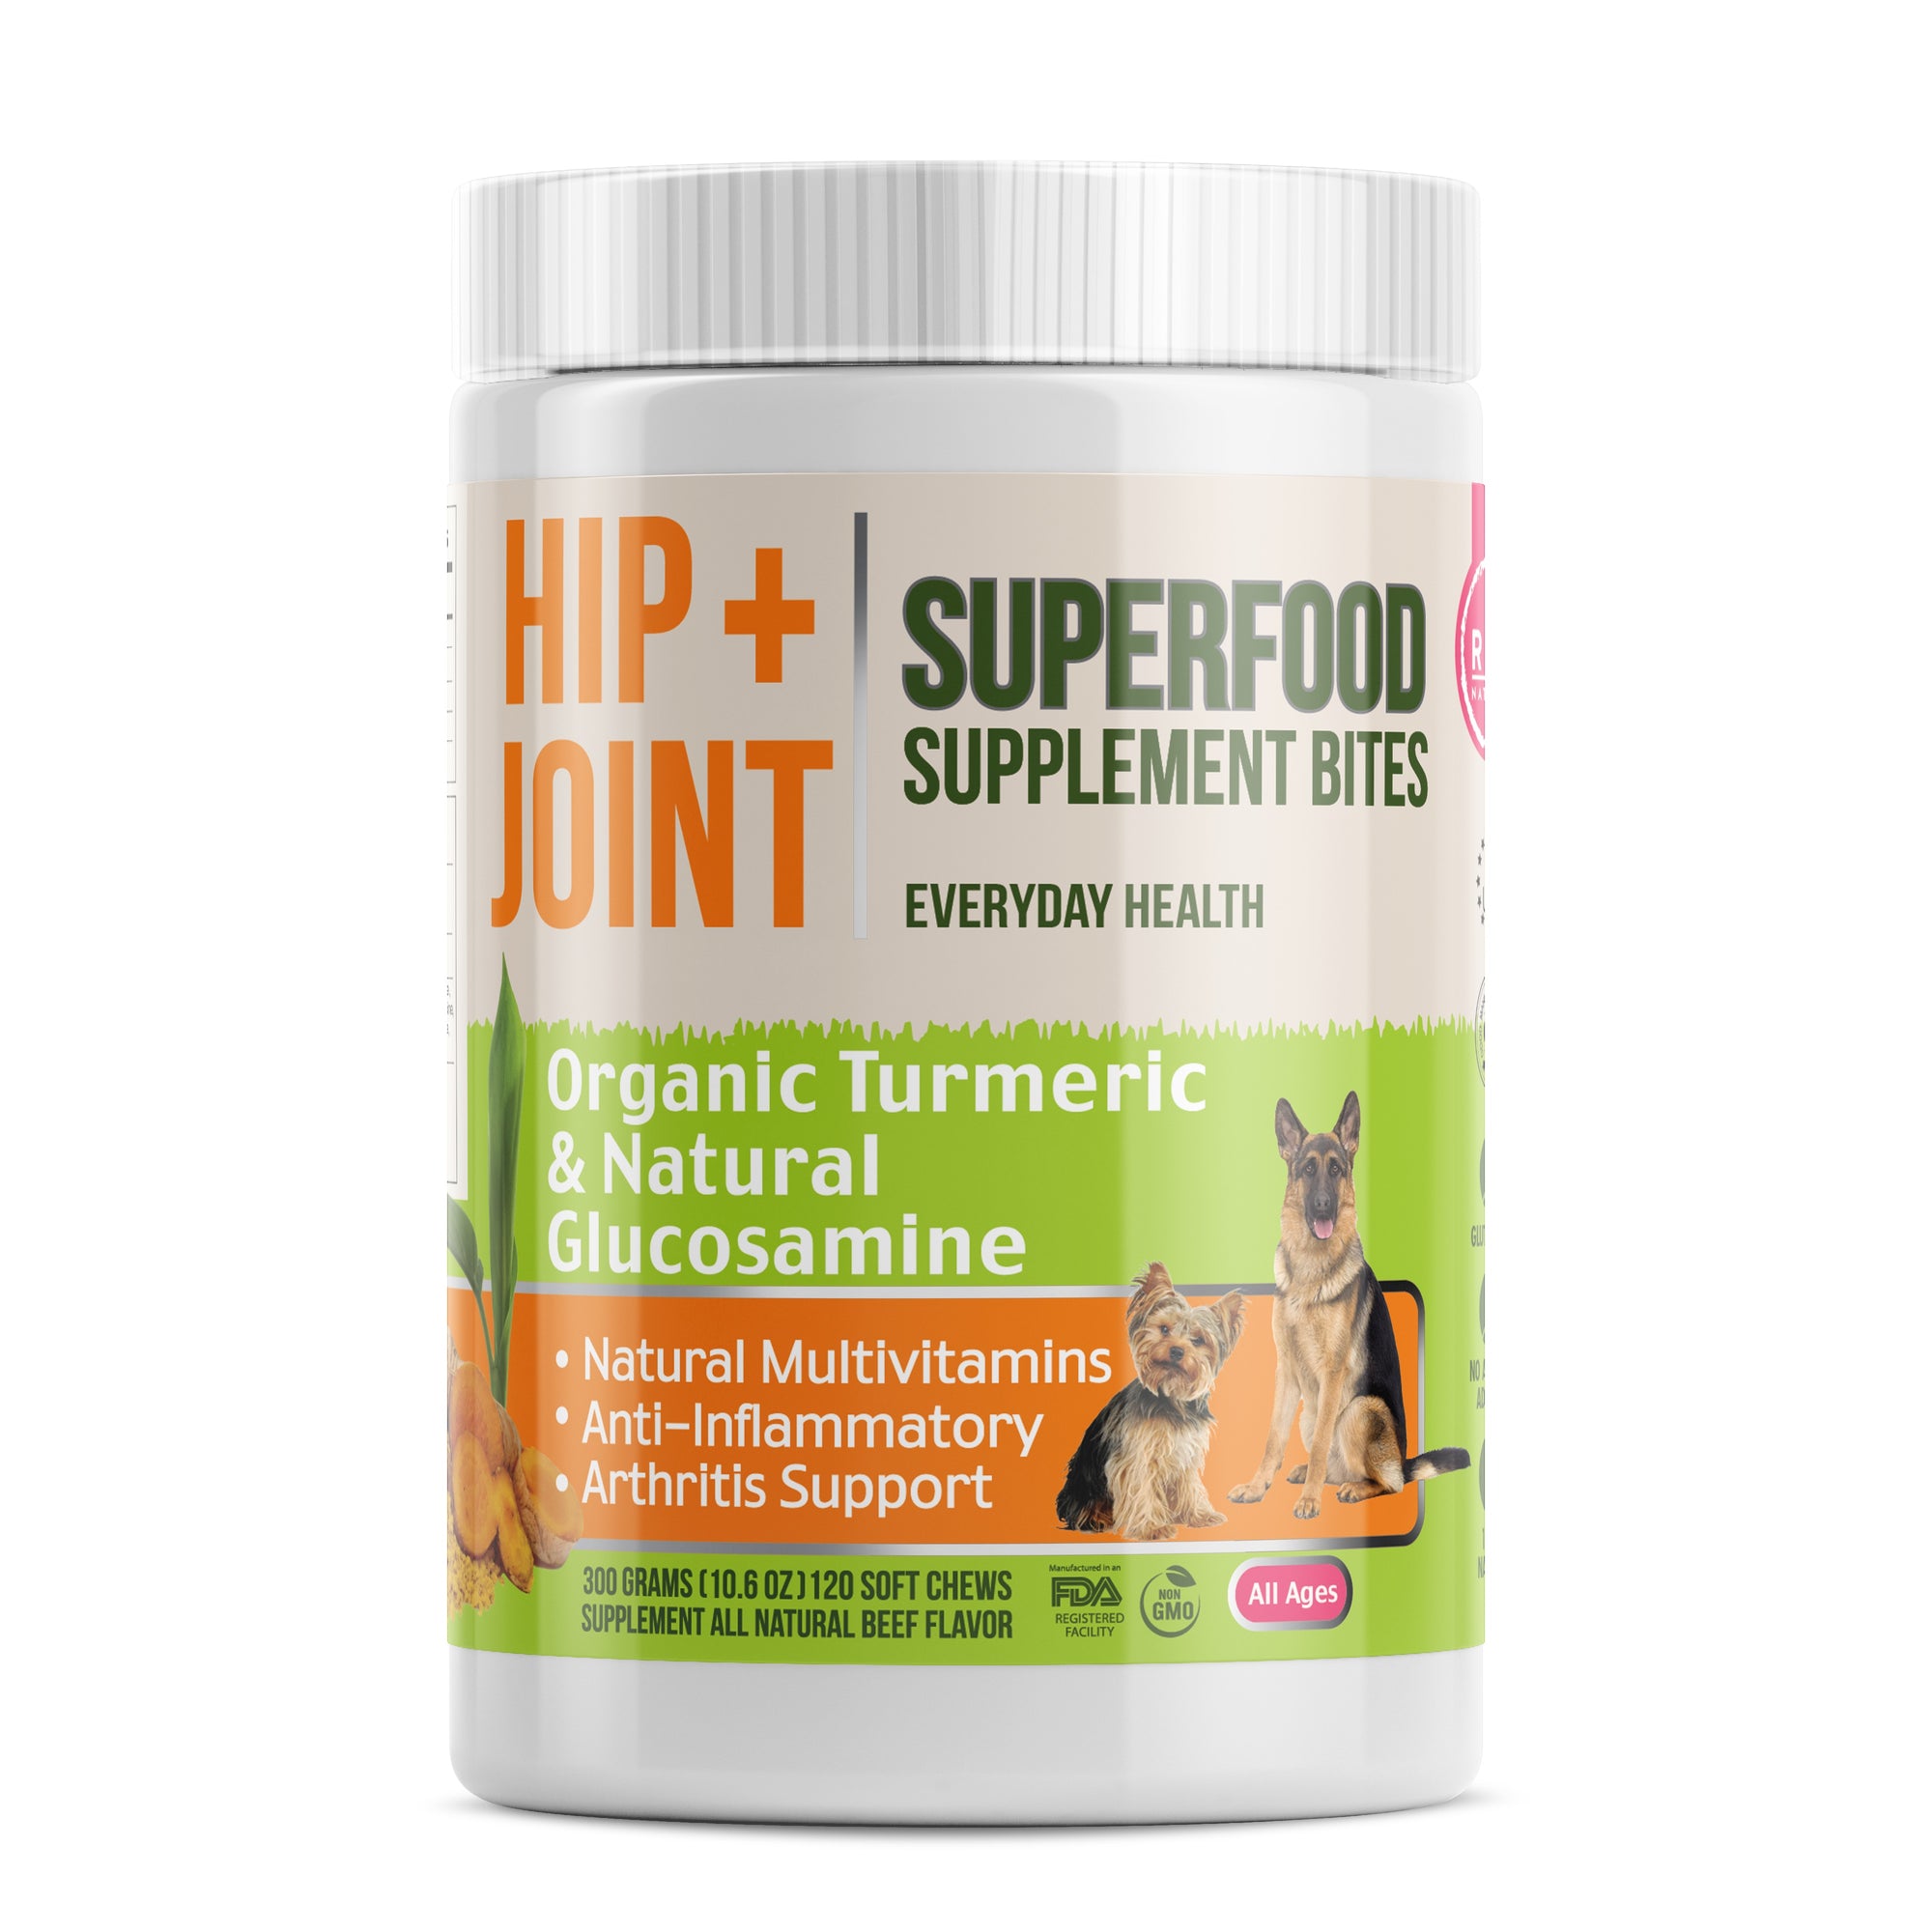 Superfood supplement for joint support